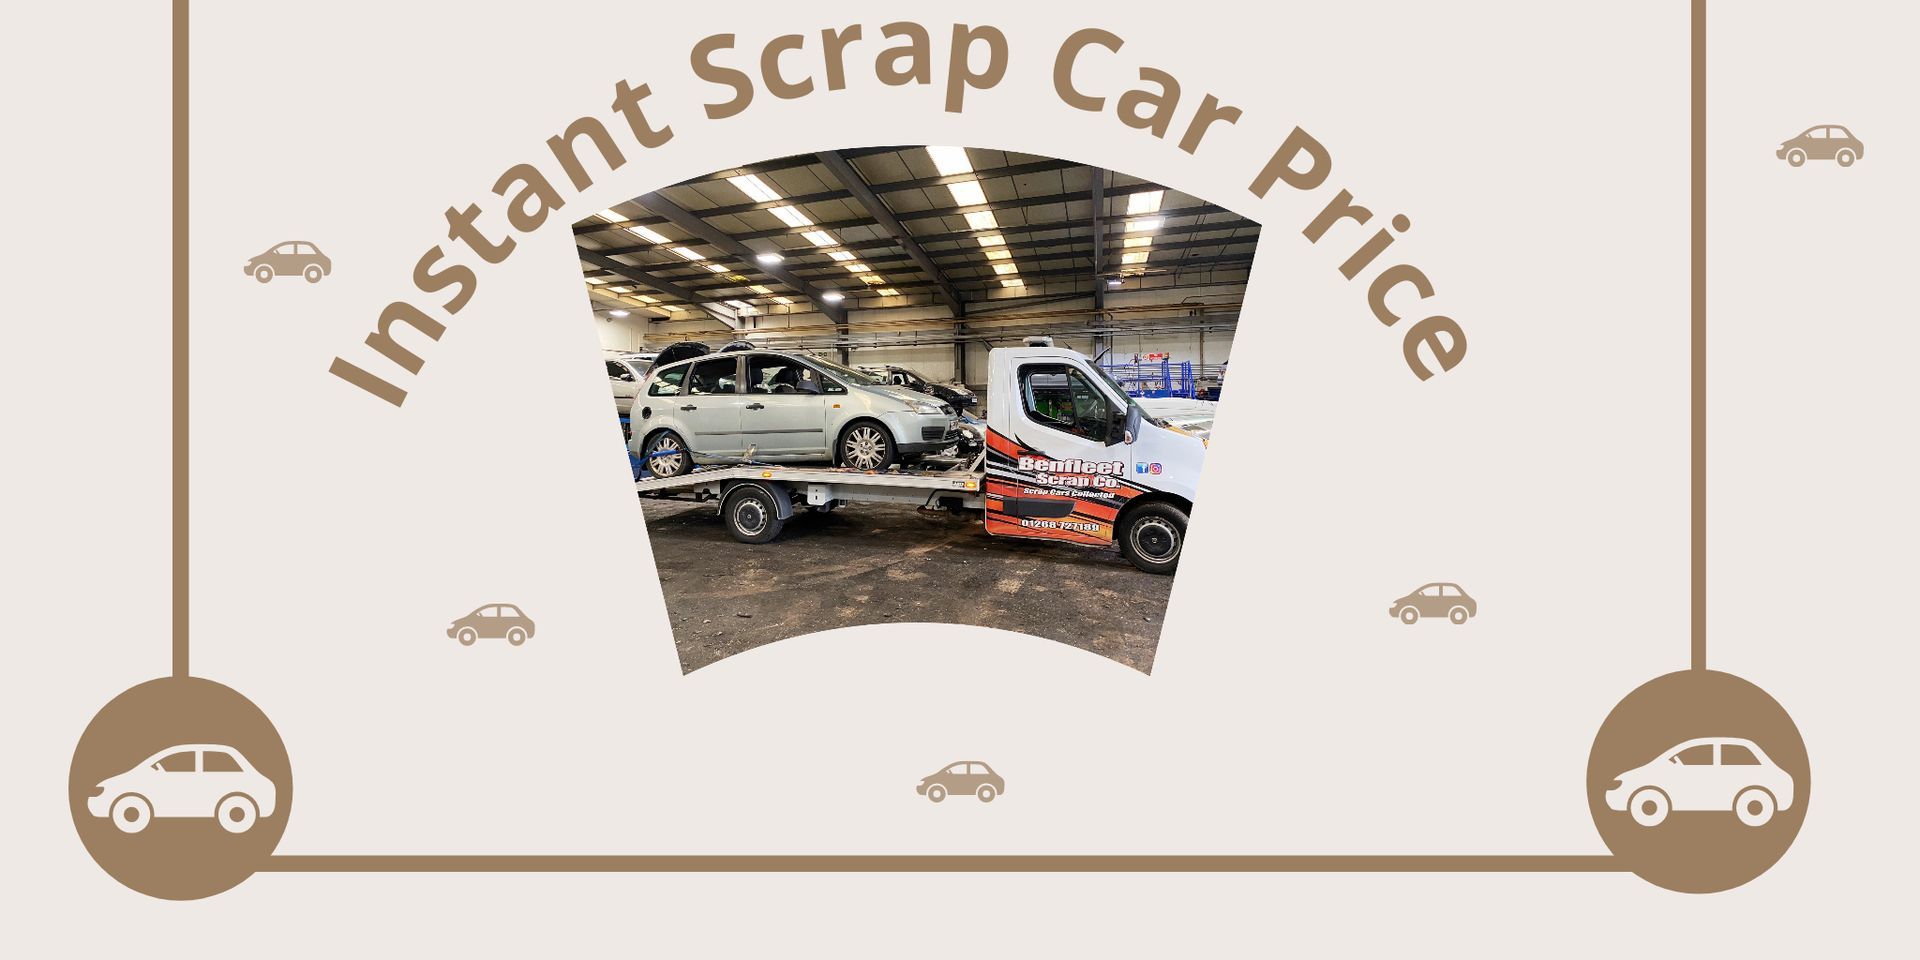 Get Cash for Your Scrap Car Instantly with Benfleet Scrap: The Quickest Way to Turn Your Car into Ca